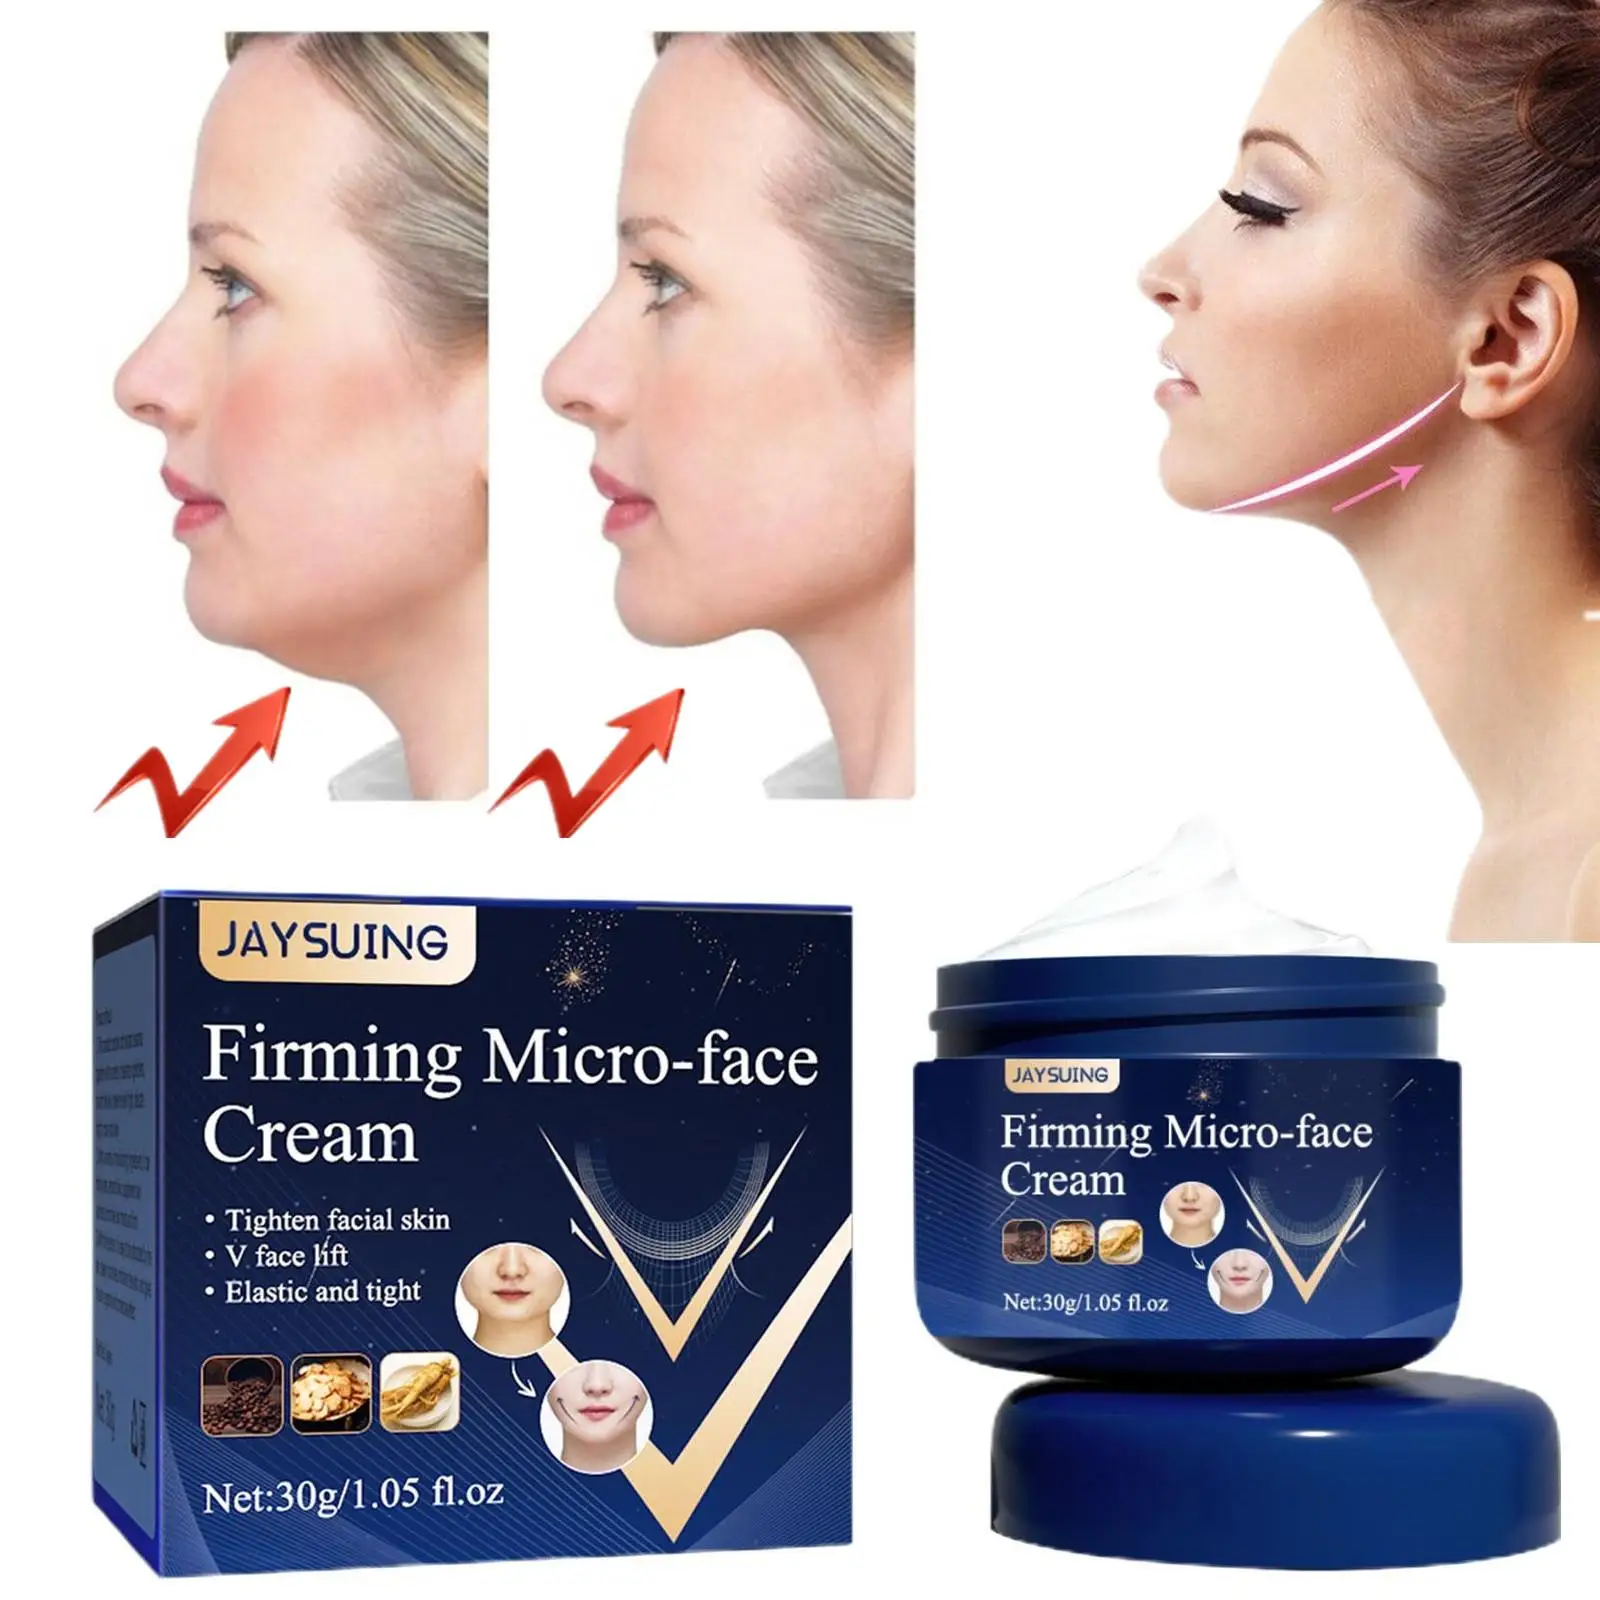 V-Shape Slimming Cream Firming Face-lift Slimming Removal Masseter Muscle Double Chin Face Fat Burning Anti-aging Products